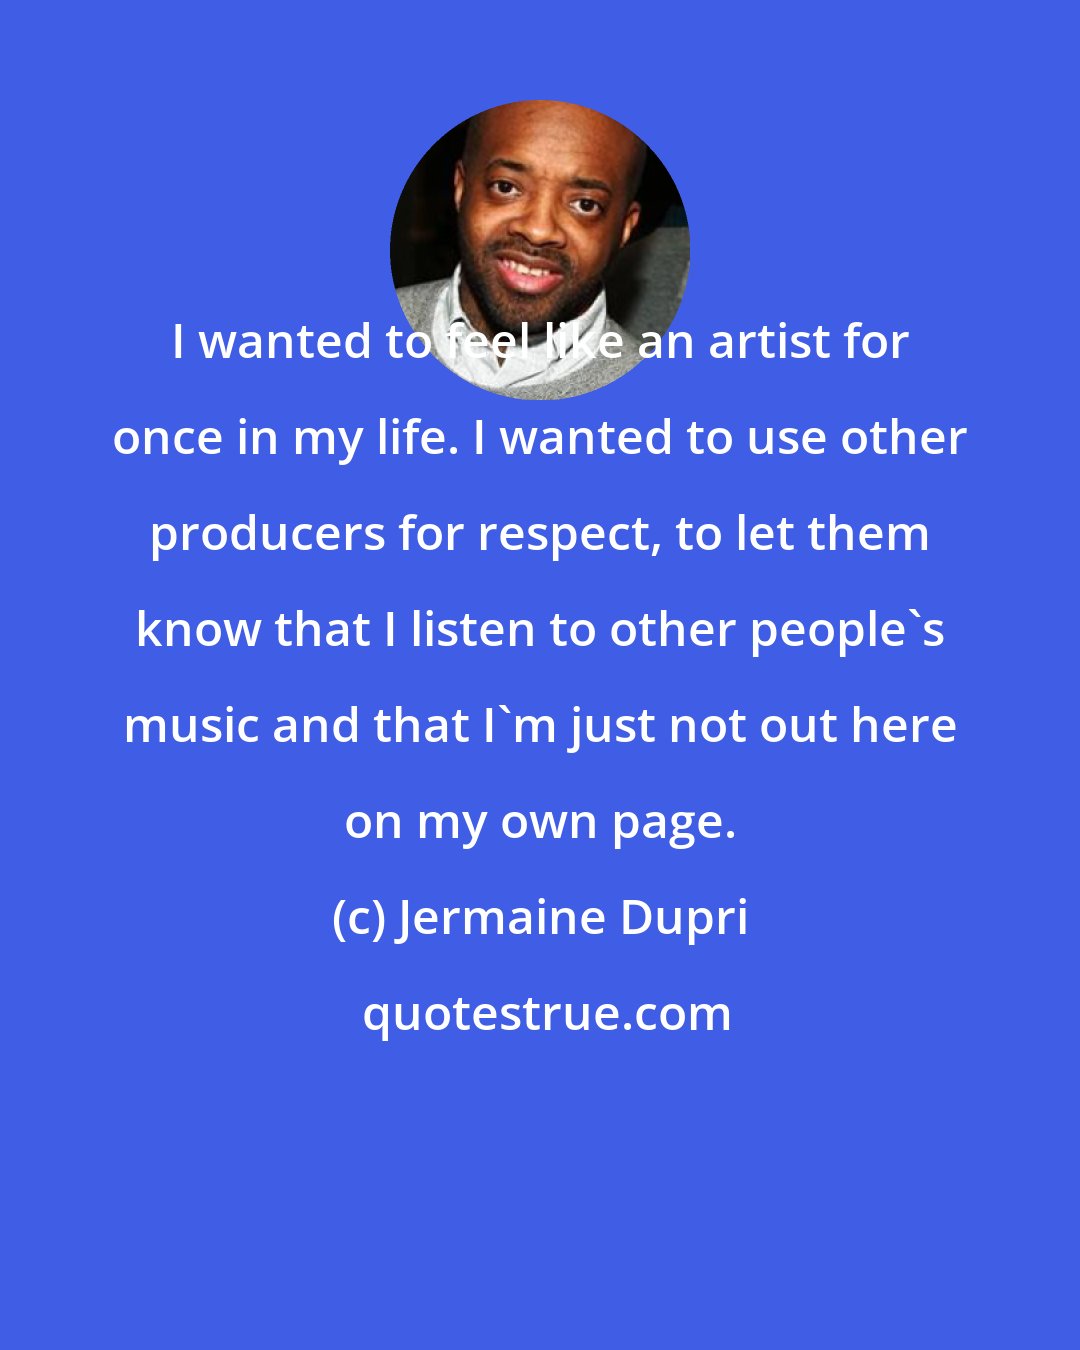 Jermaine Dupri: I wanted to feel like an artist for once in my life. I wanted to use other producers for respect, to let them know that I listen to other people's music and that I'm just not out here on my own page.